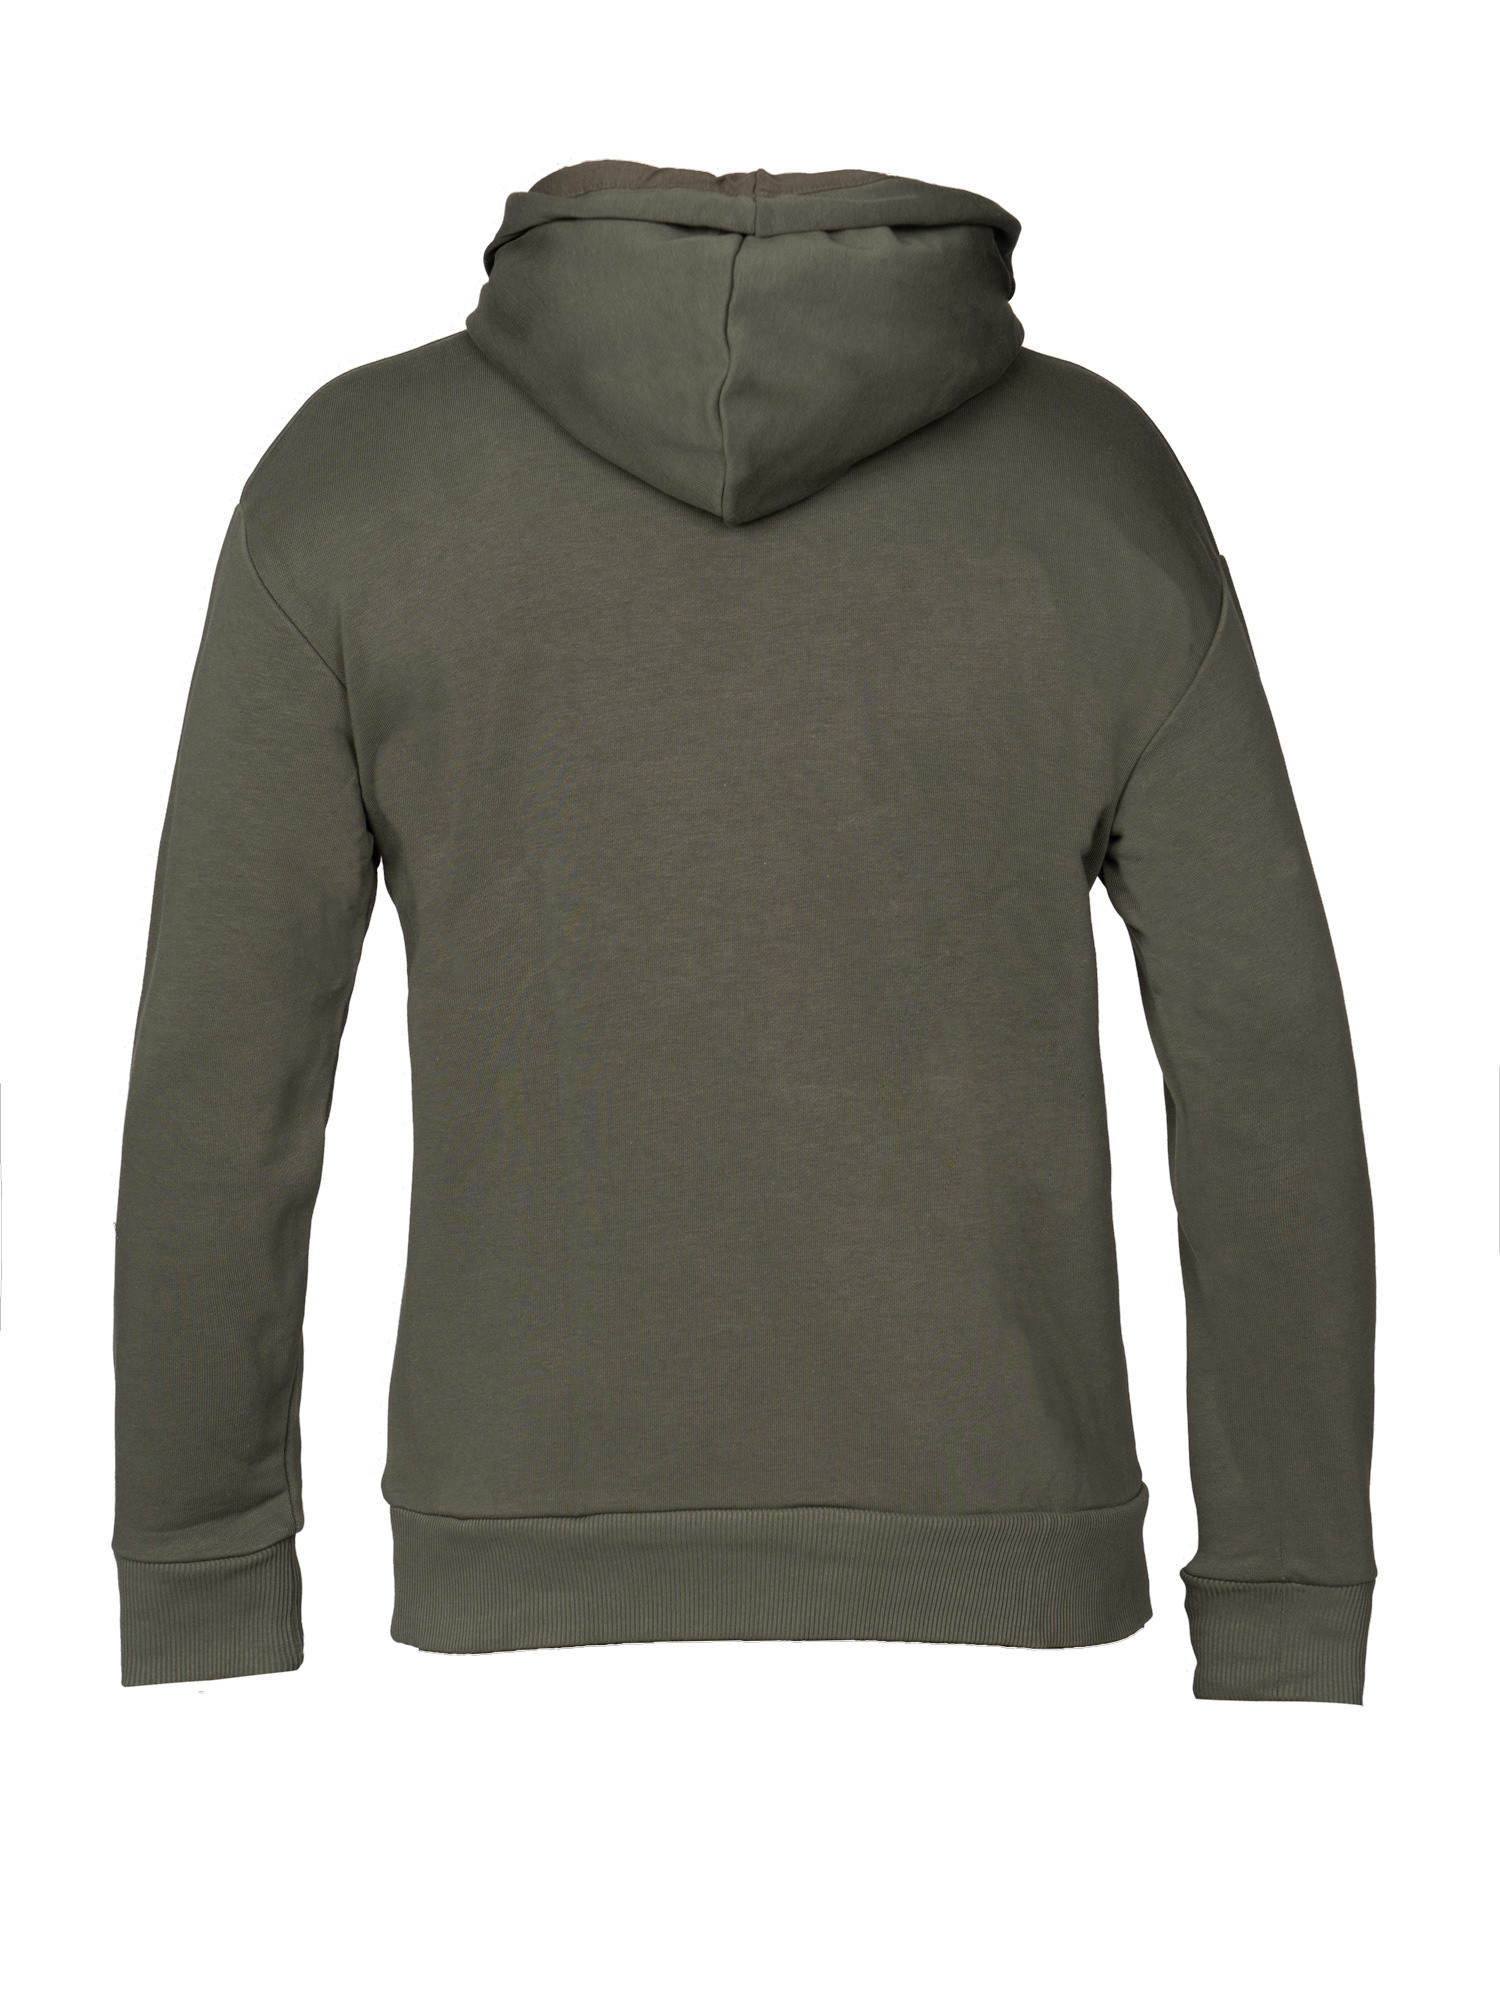 Project hooded sweatshirt, Olive Green, large image number 1